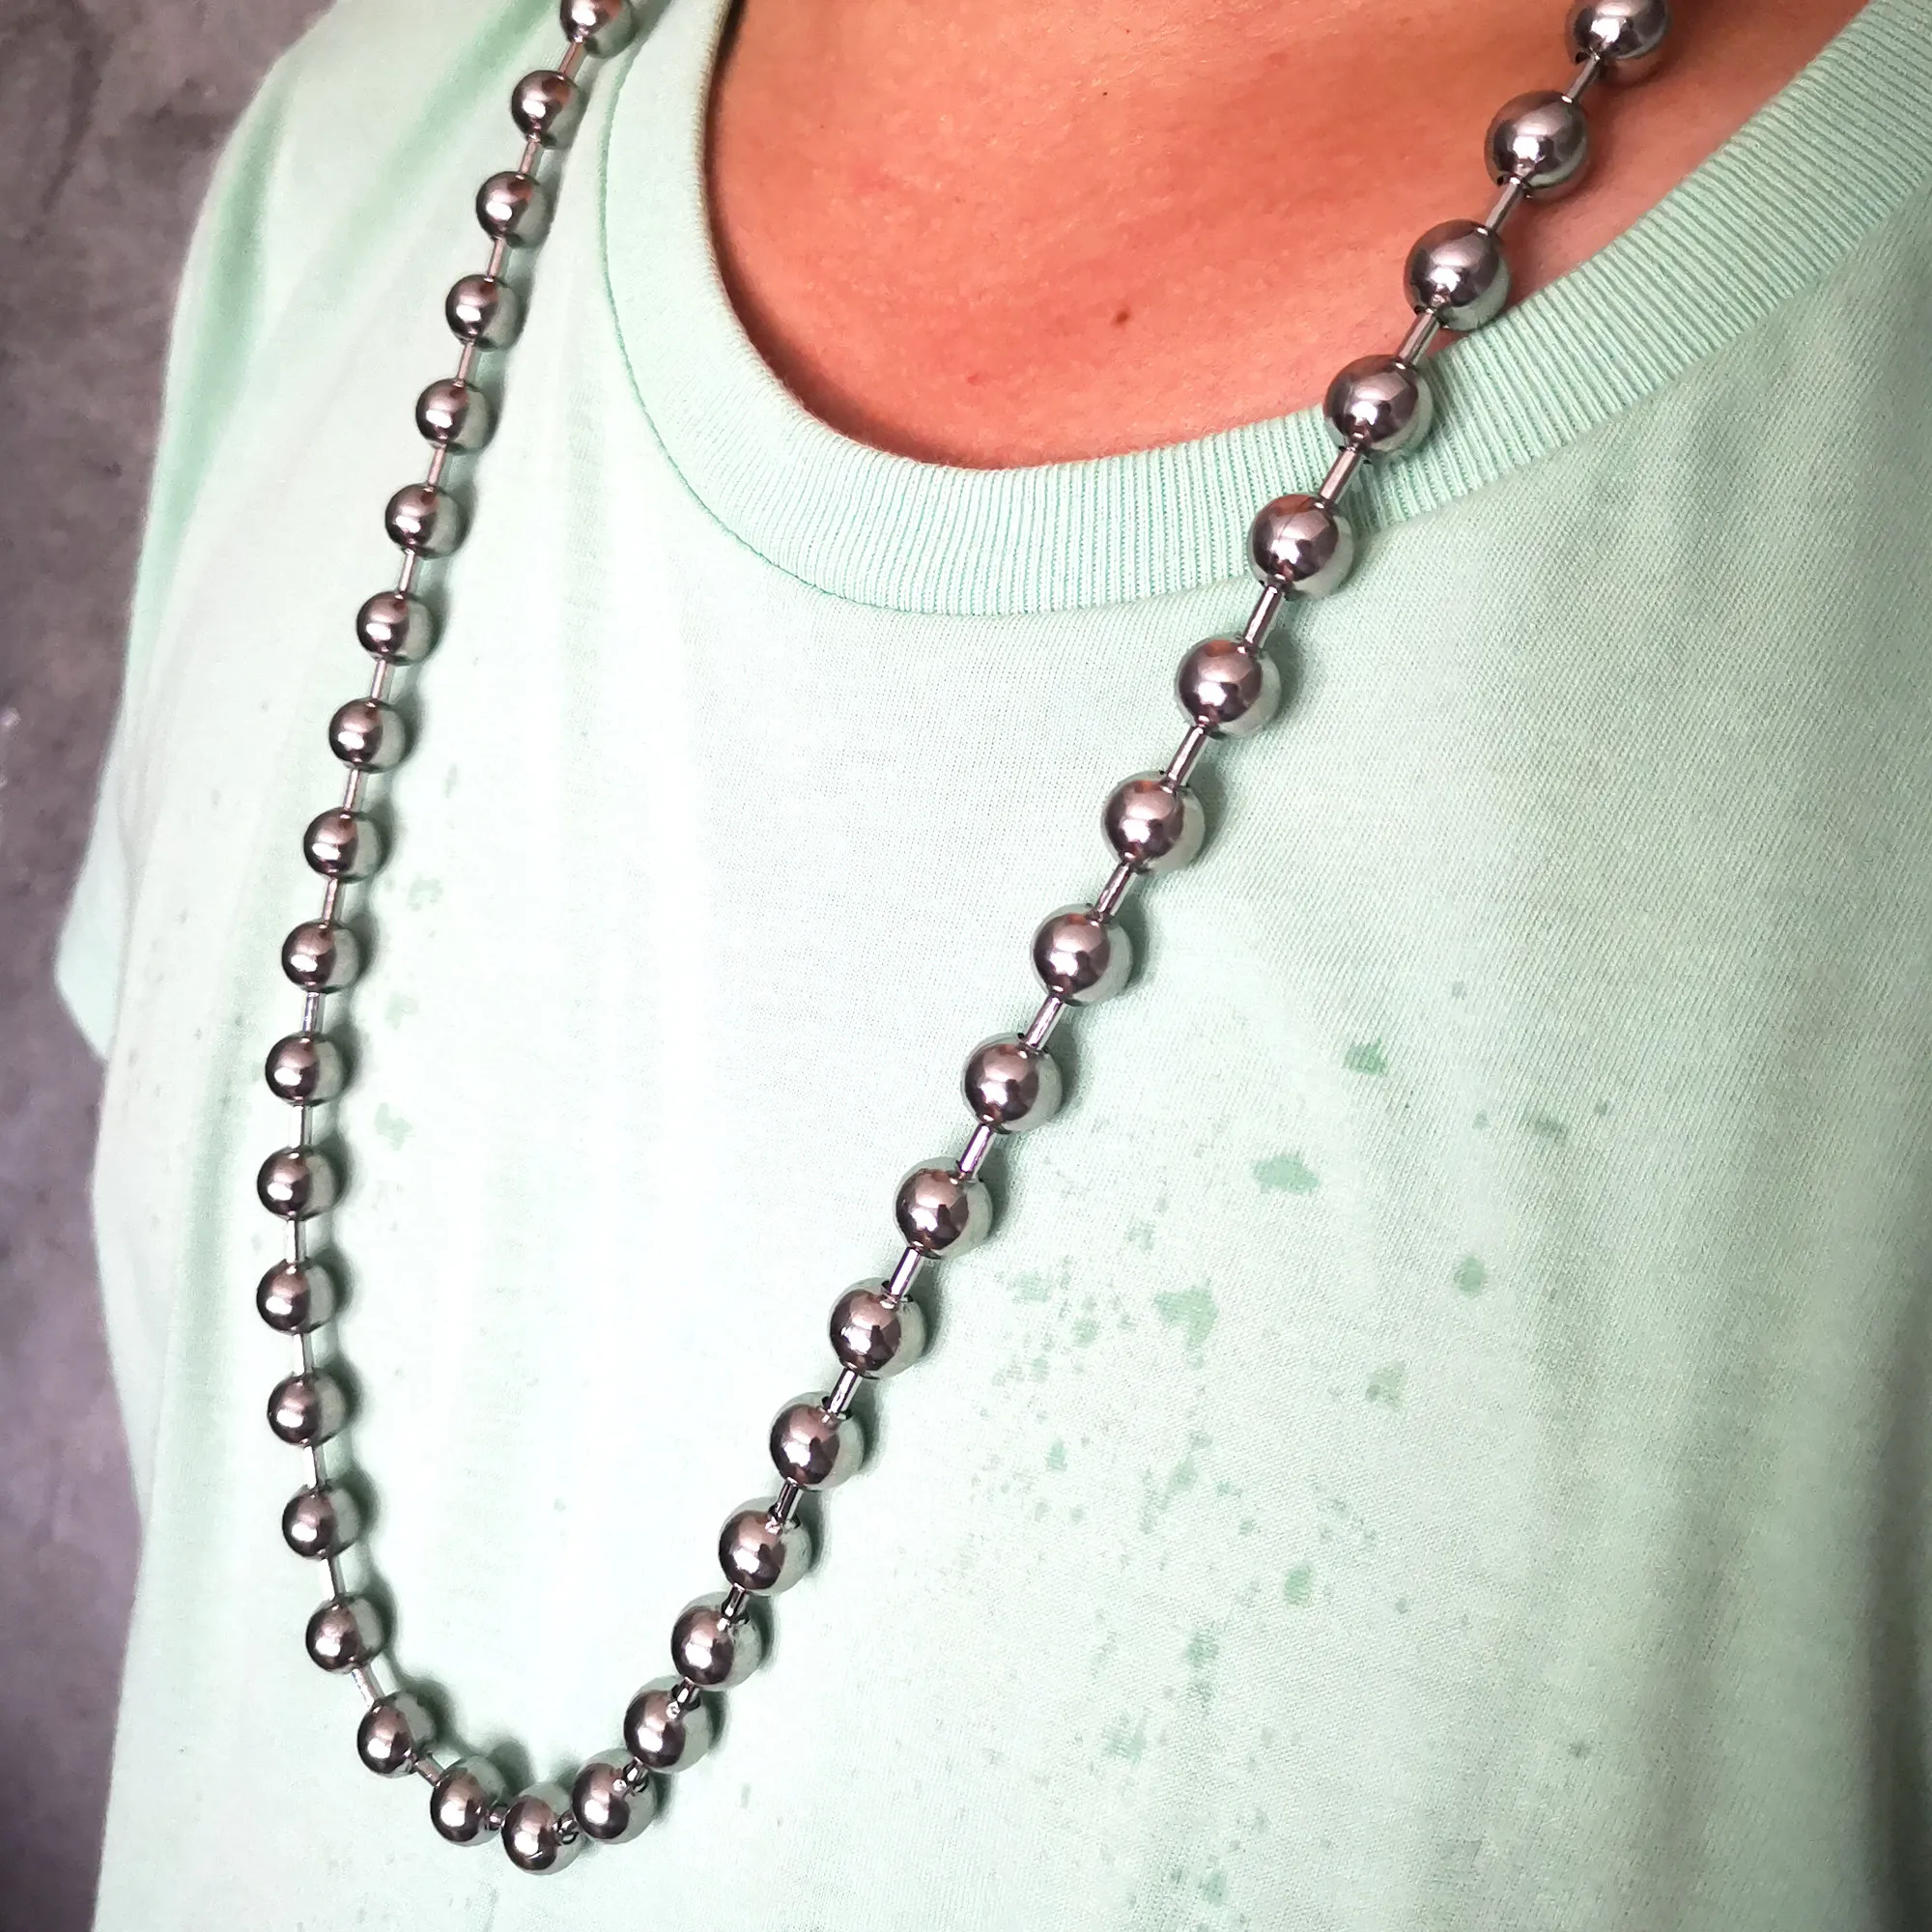 DIY Mens Jewelry: 10mm Wide Silver Stainless Steel Ball Chain Beads Pearl  Necklace Men 18 40 Inch Size From Yueyang86, $6.64